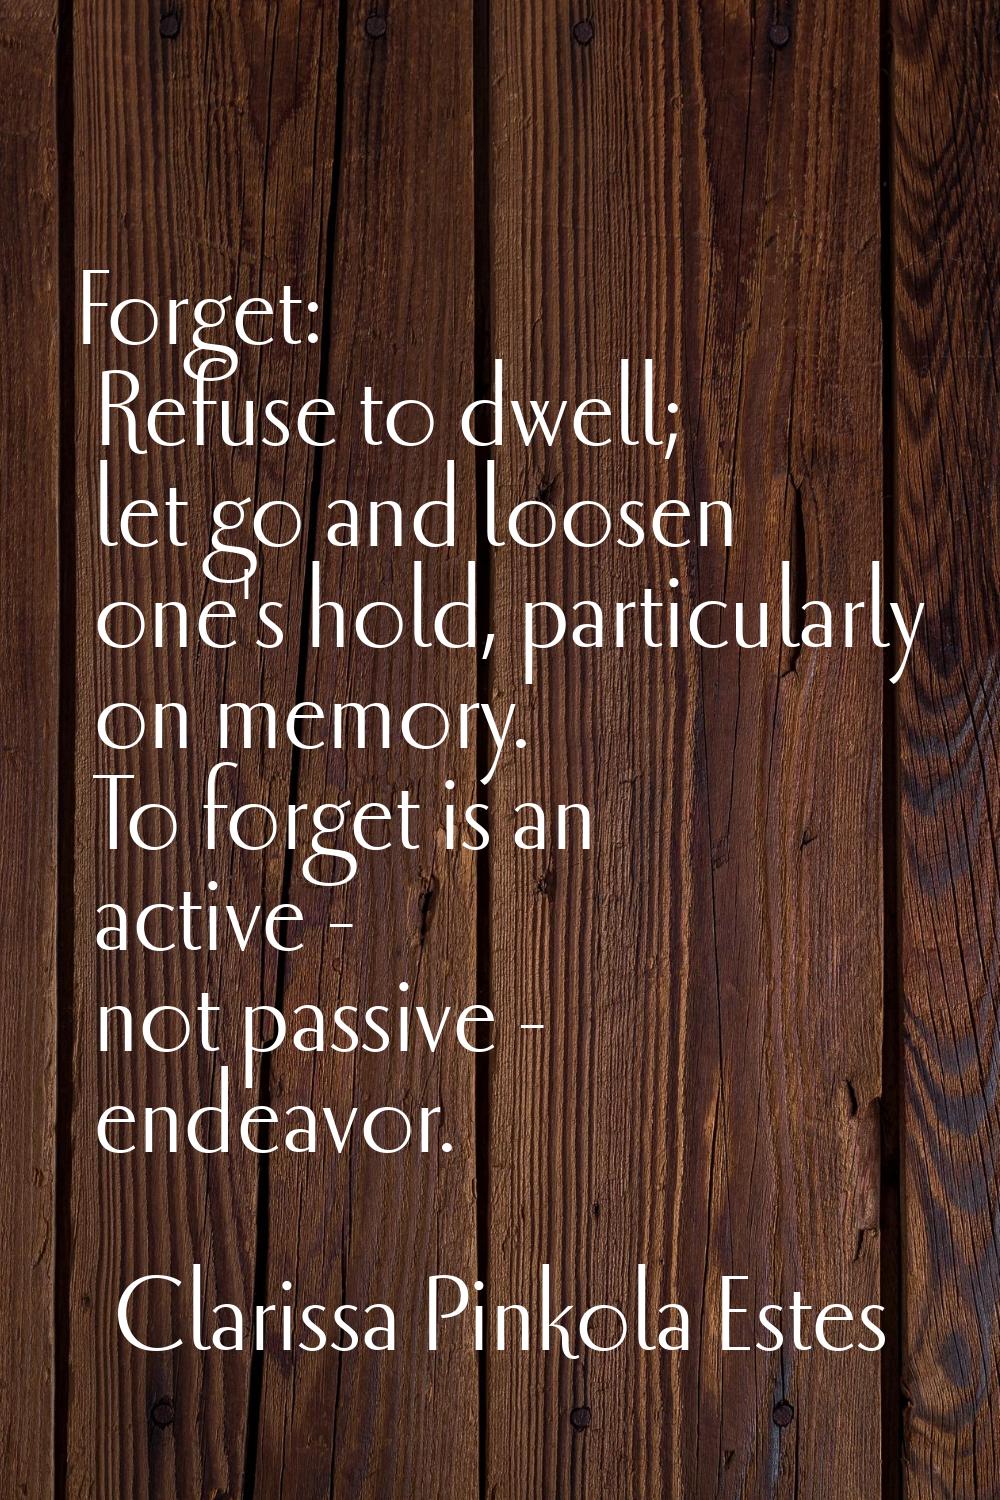 Forget: Refuse to dwell; let go and loosen one's hold, particularly on memory. To forget is an acti